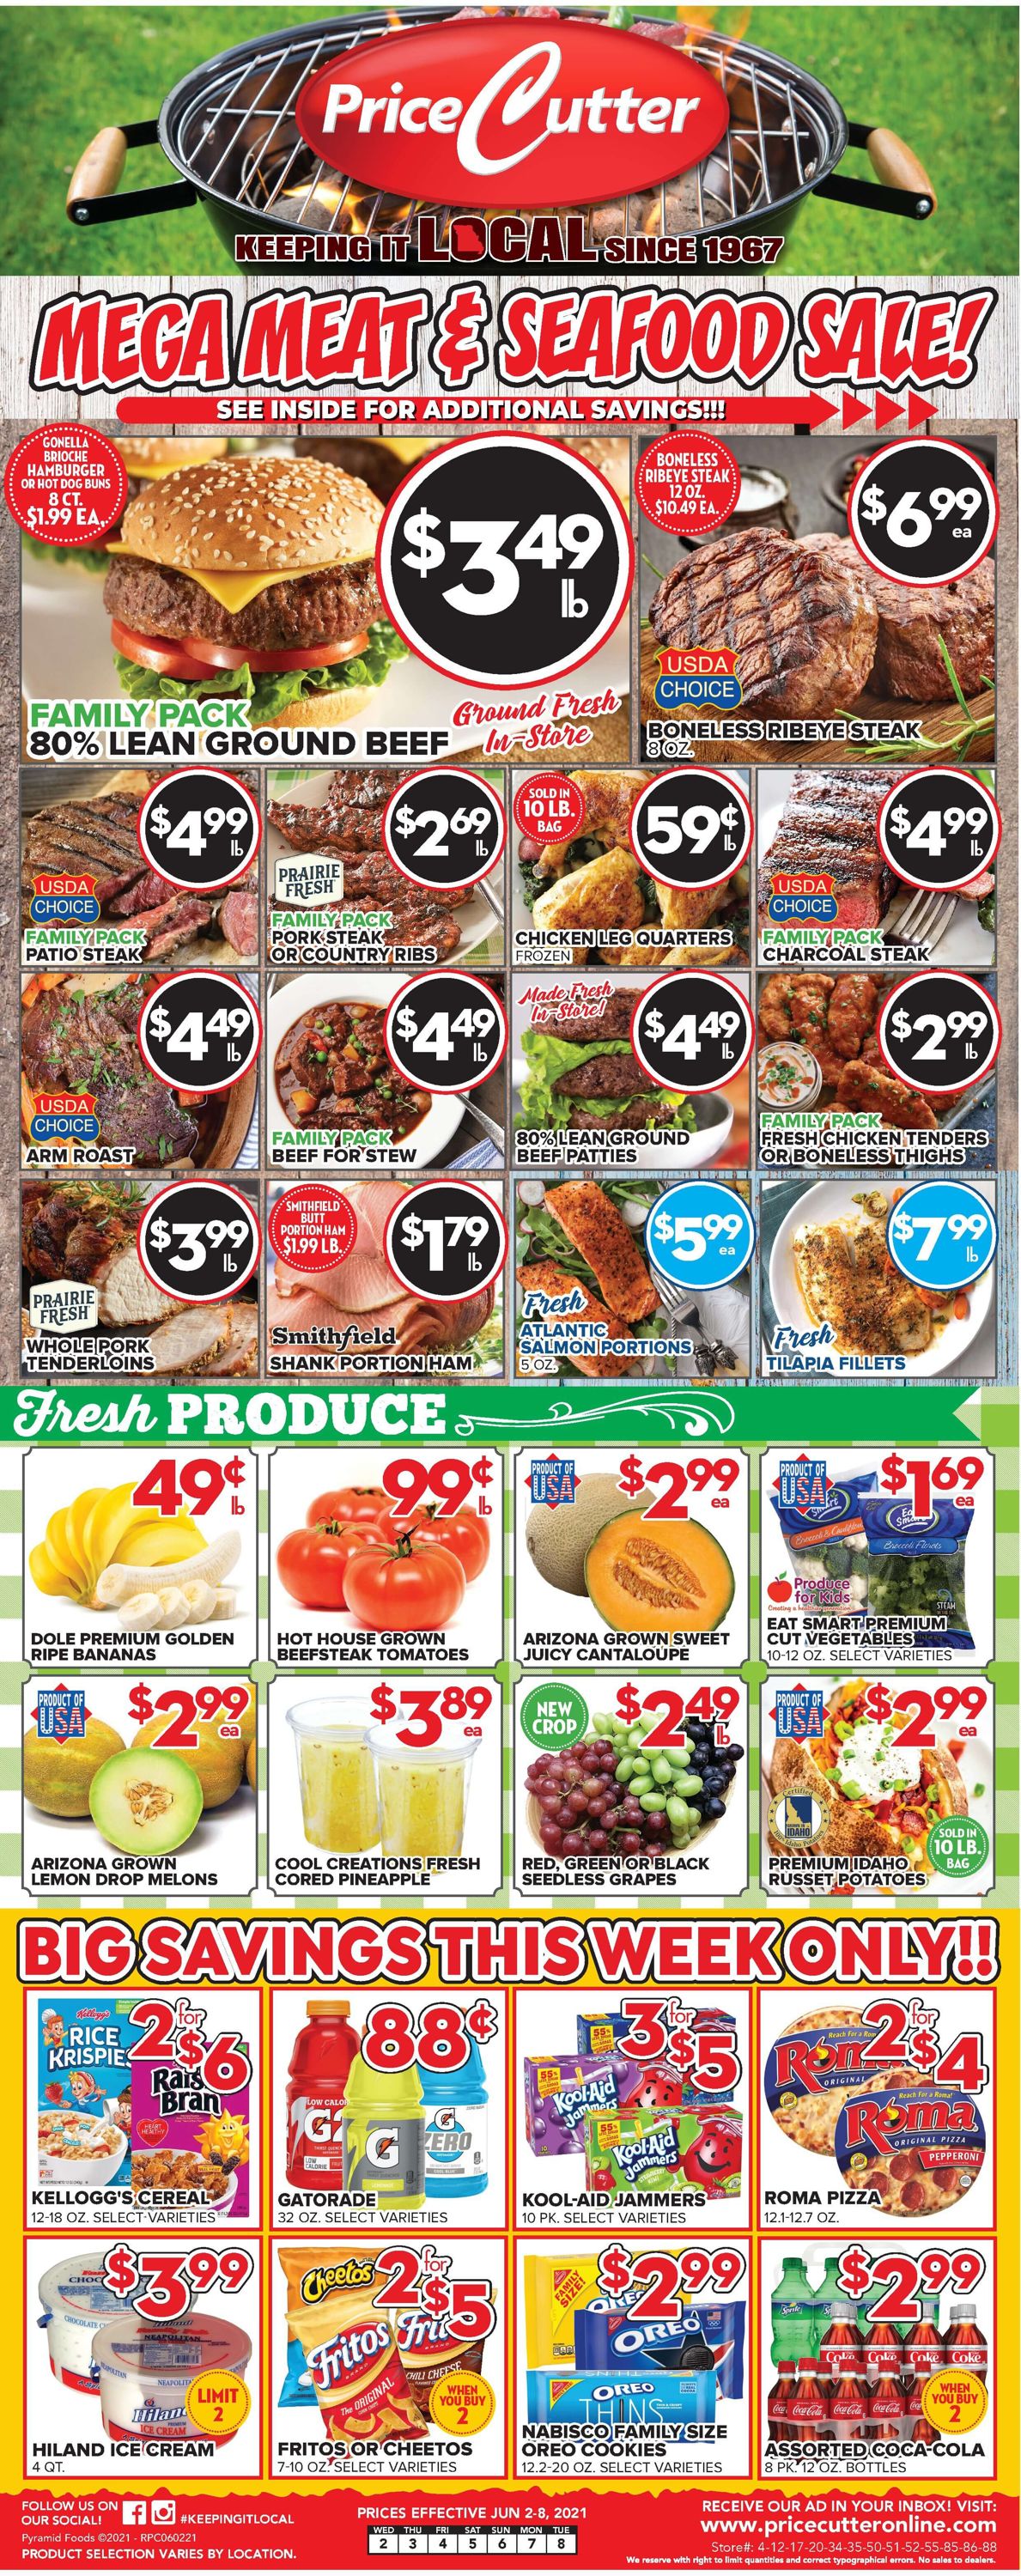 Price Cutter Weekly Ad Circular - valid 06/02-06/08/2021